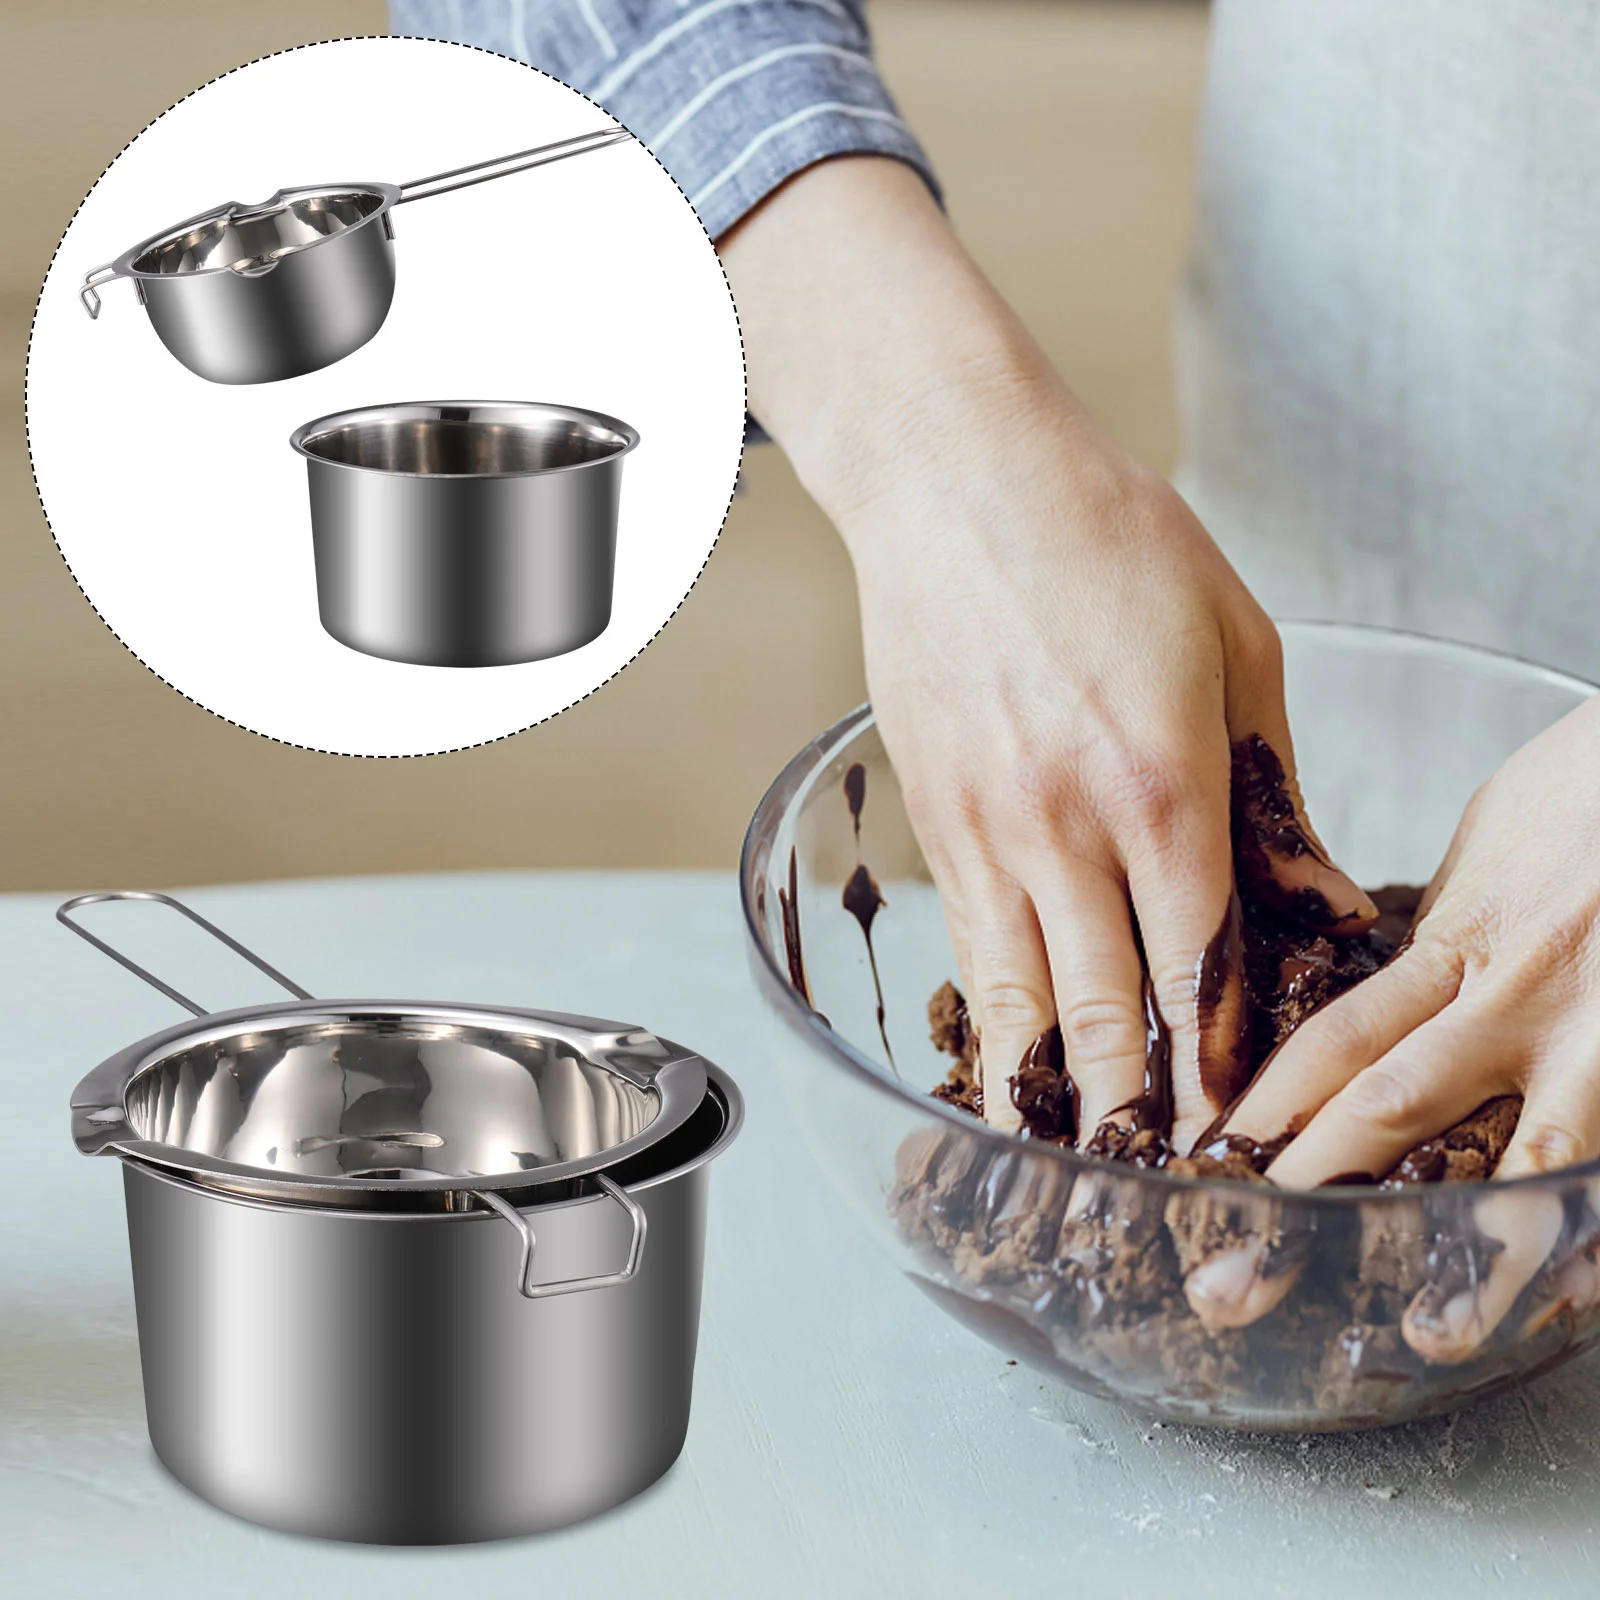 

Pot Melting Boiler Double Chocolate Wax Candy Cheese Stainless Steel Making Butter Pan Warmer Soap Bowl Pouring Fondue Melt Set